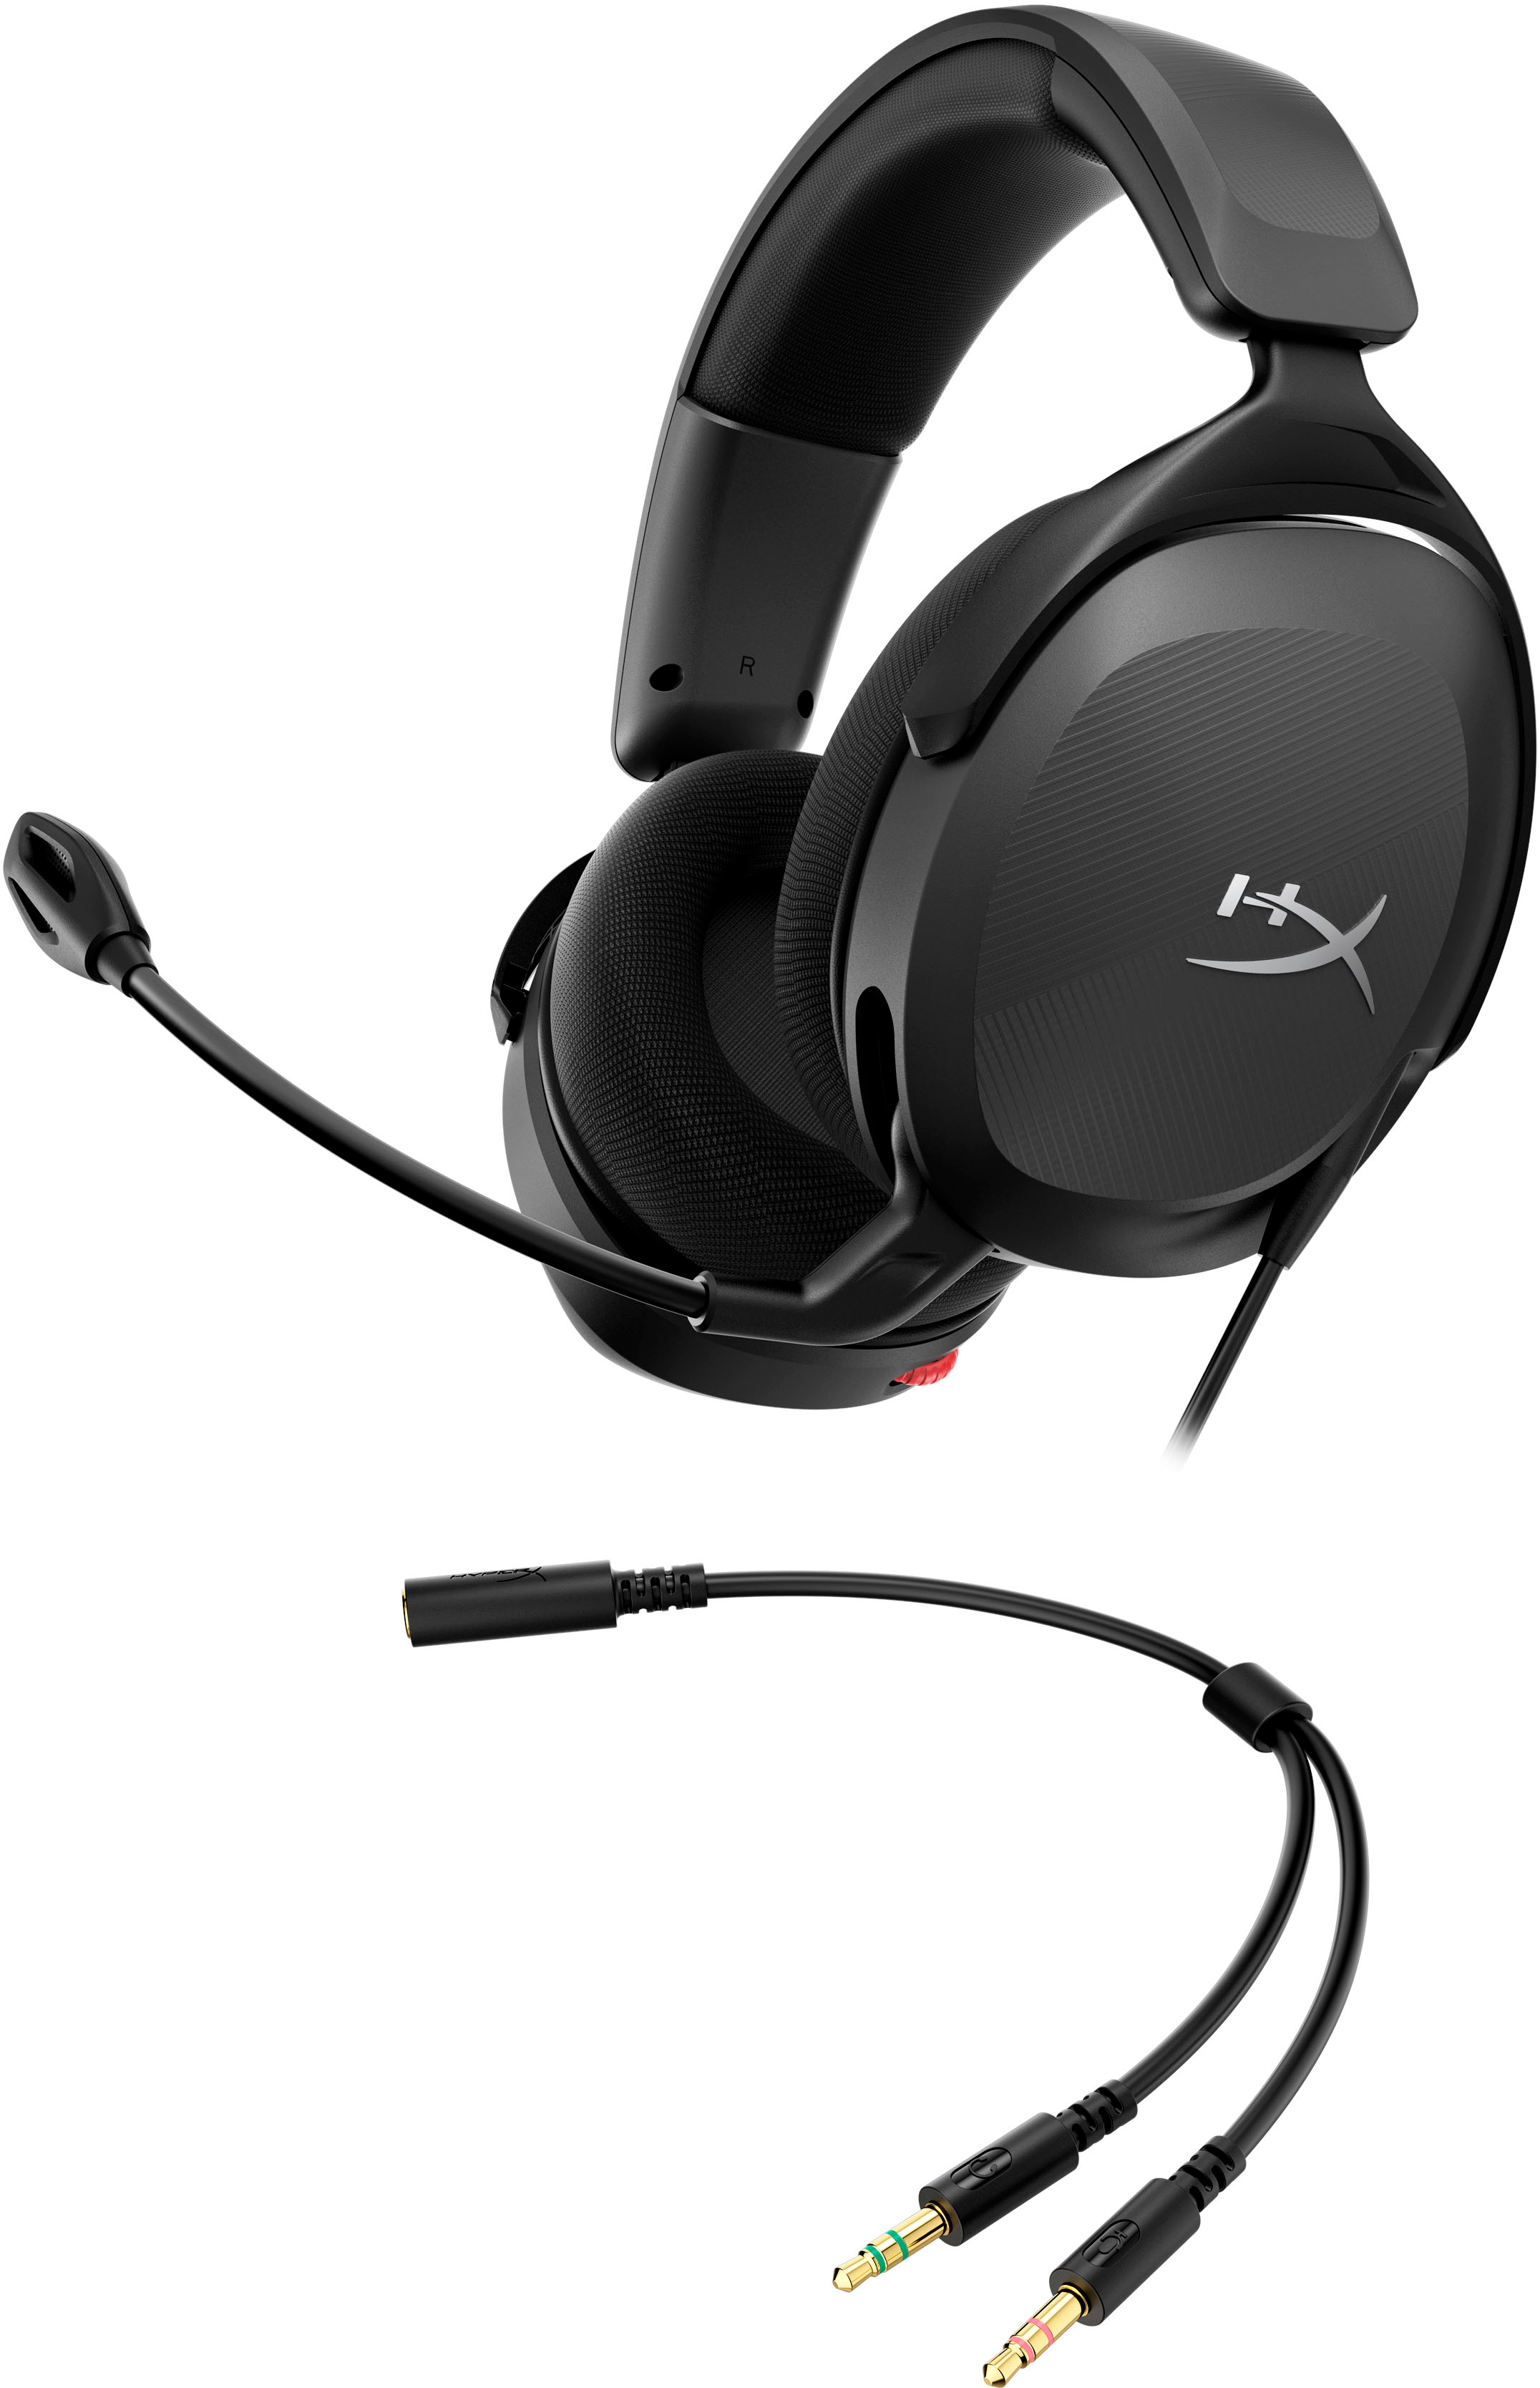 Headset Stinger HyperX Buy 2 Gaming - Black 683L9AA PC Cloud Core Best Wired for